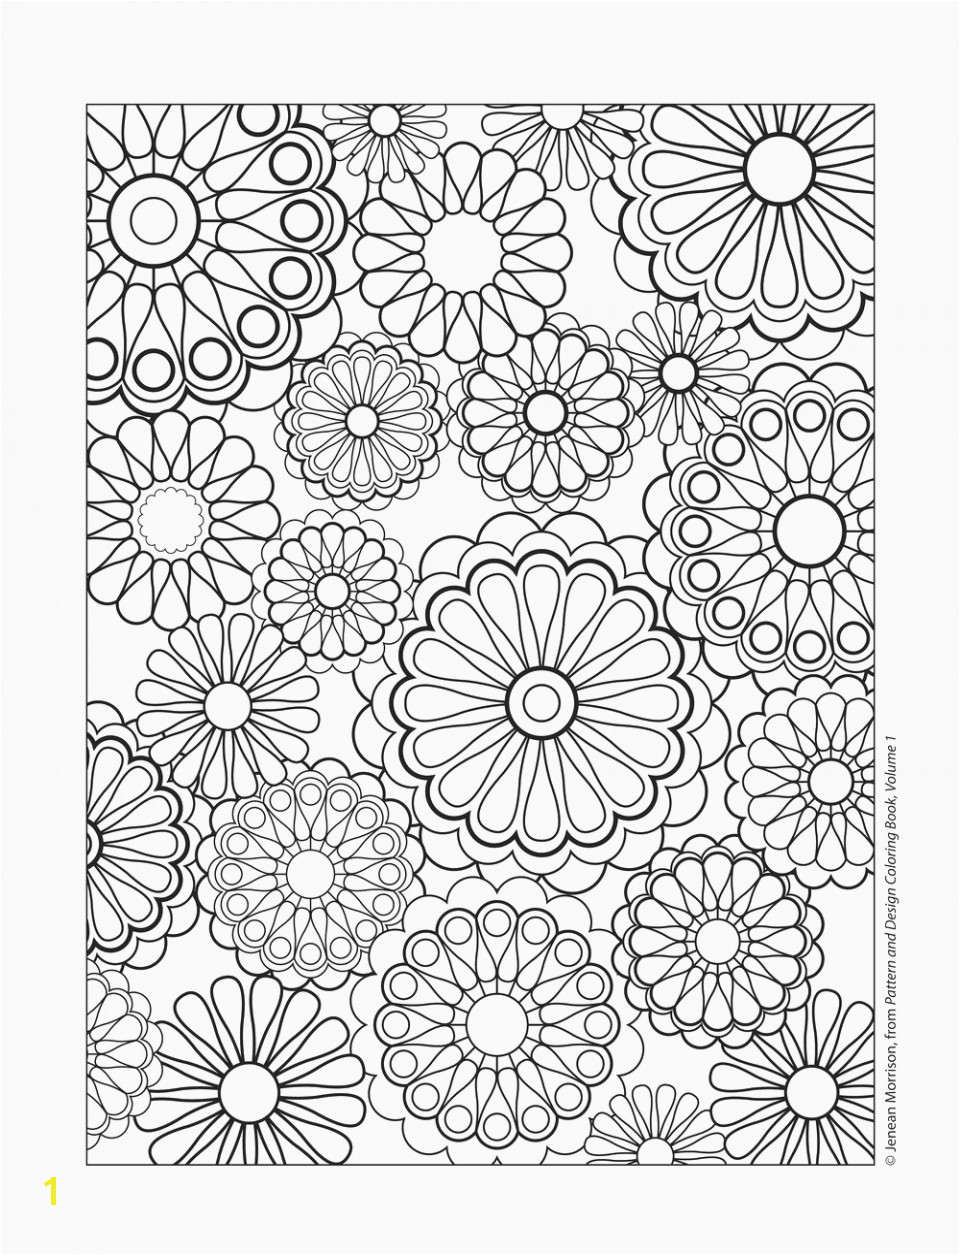 Color Pages for Adults Adult Coloring Book Pages Coloring Pages Patterns Best Coloring Book